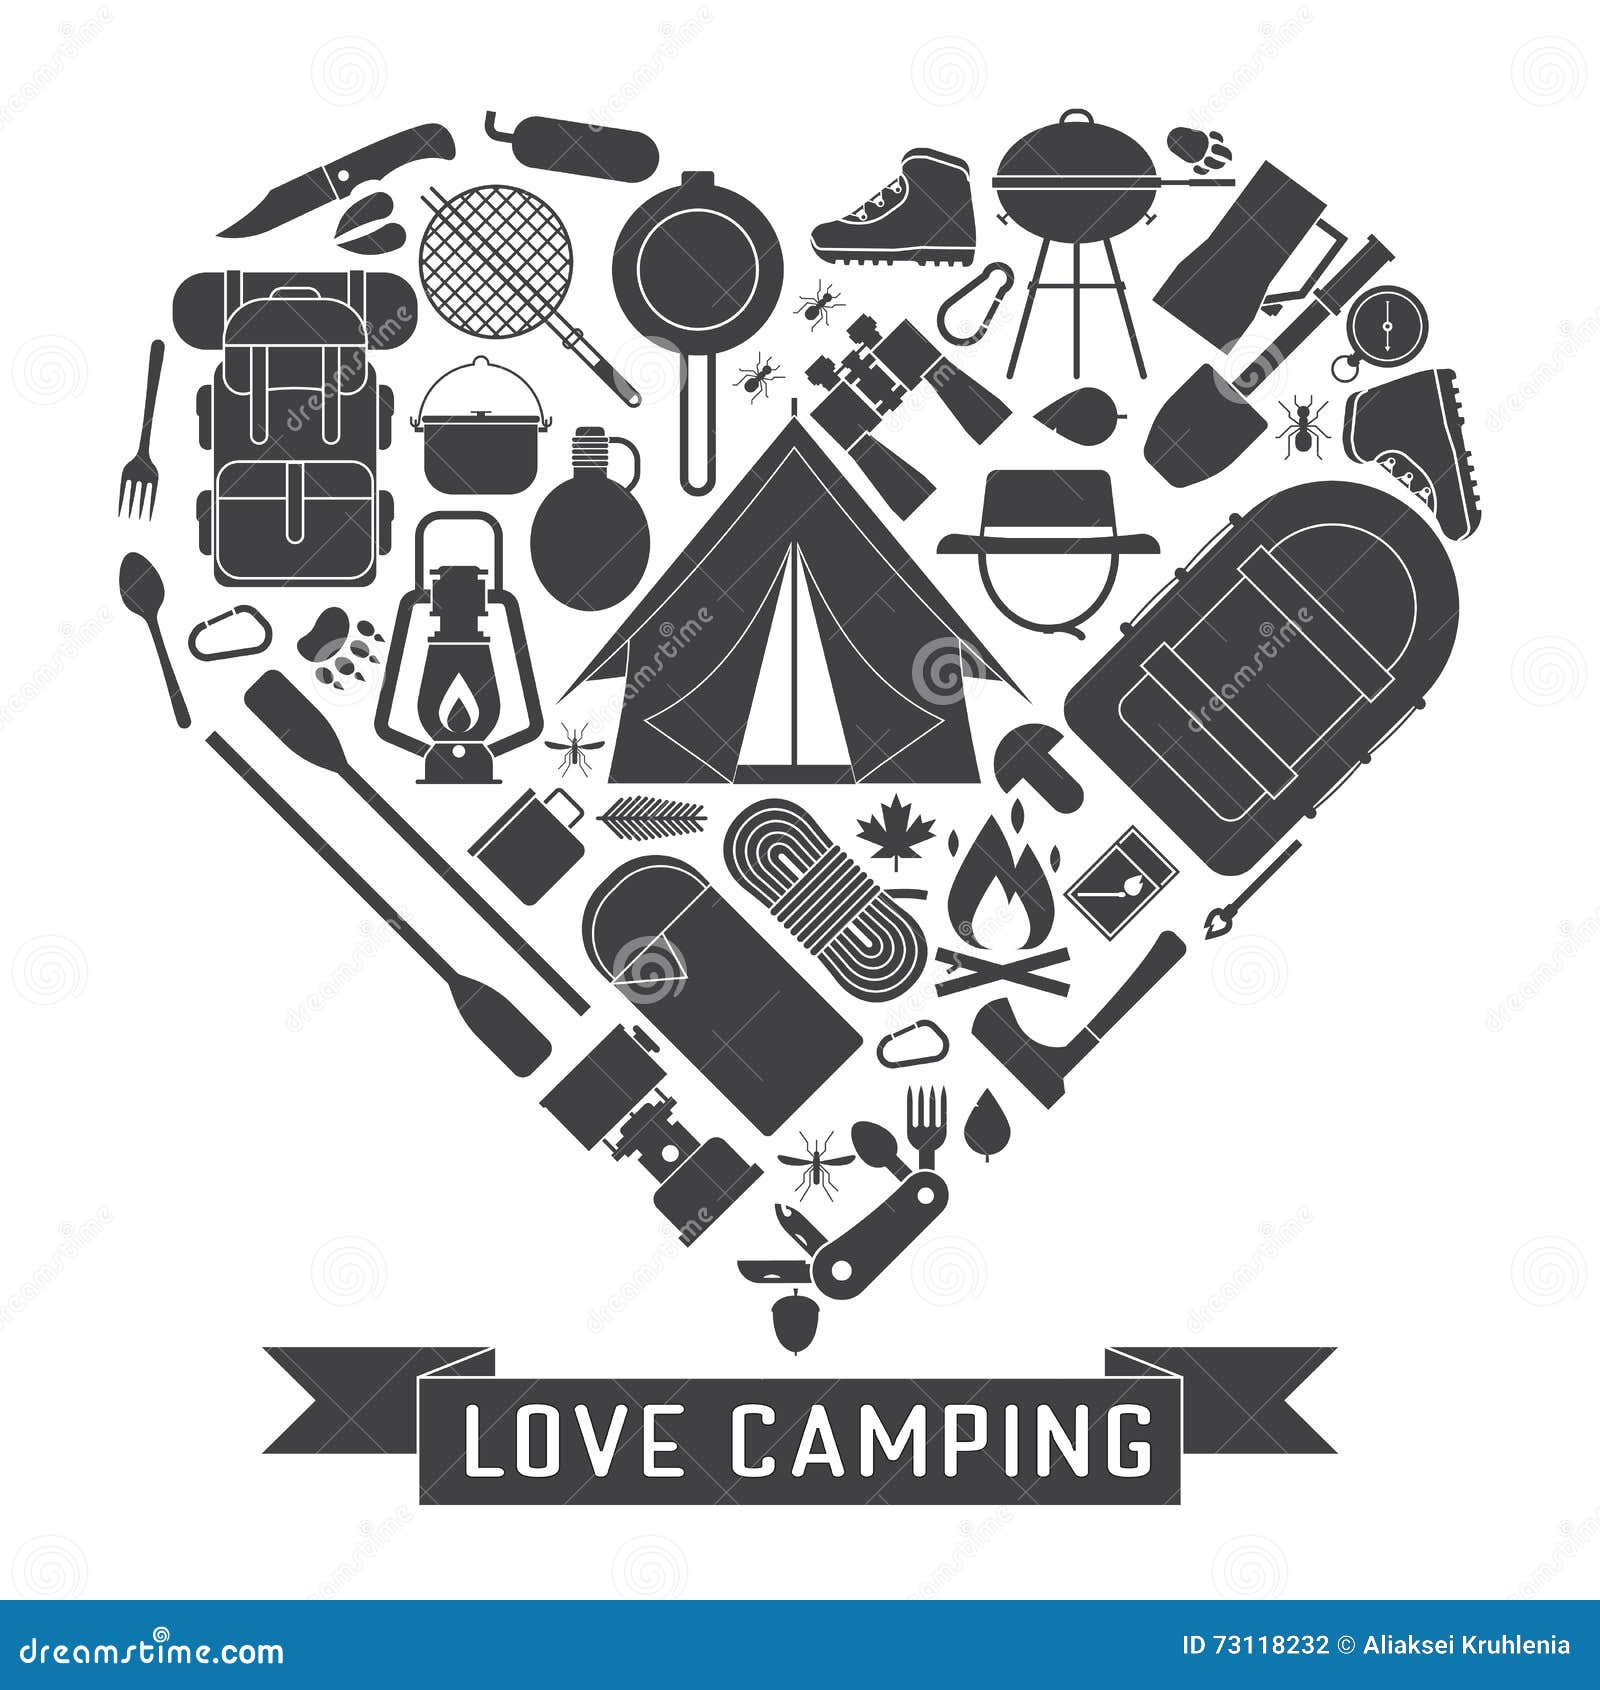 Download Love Camping Outline Concept Heart Stock Vector ...